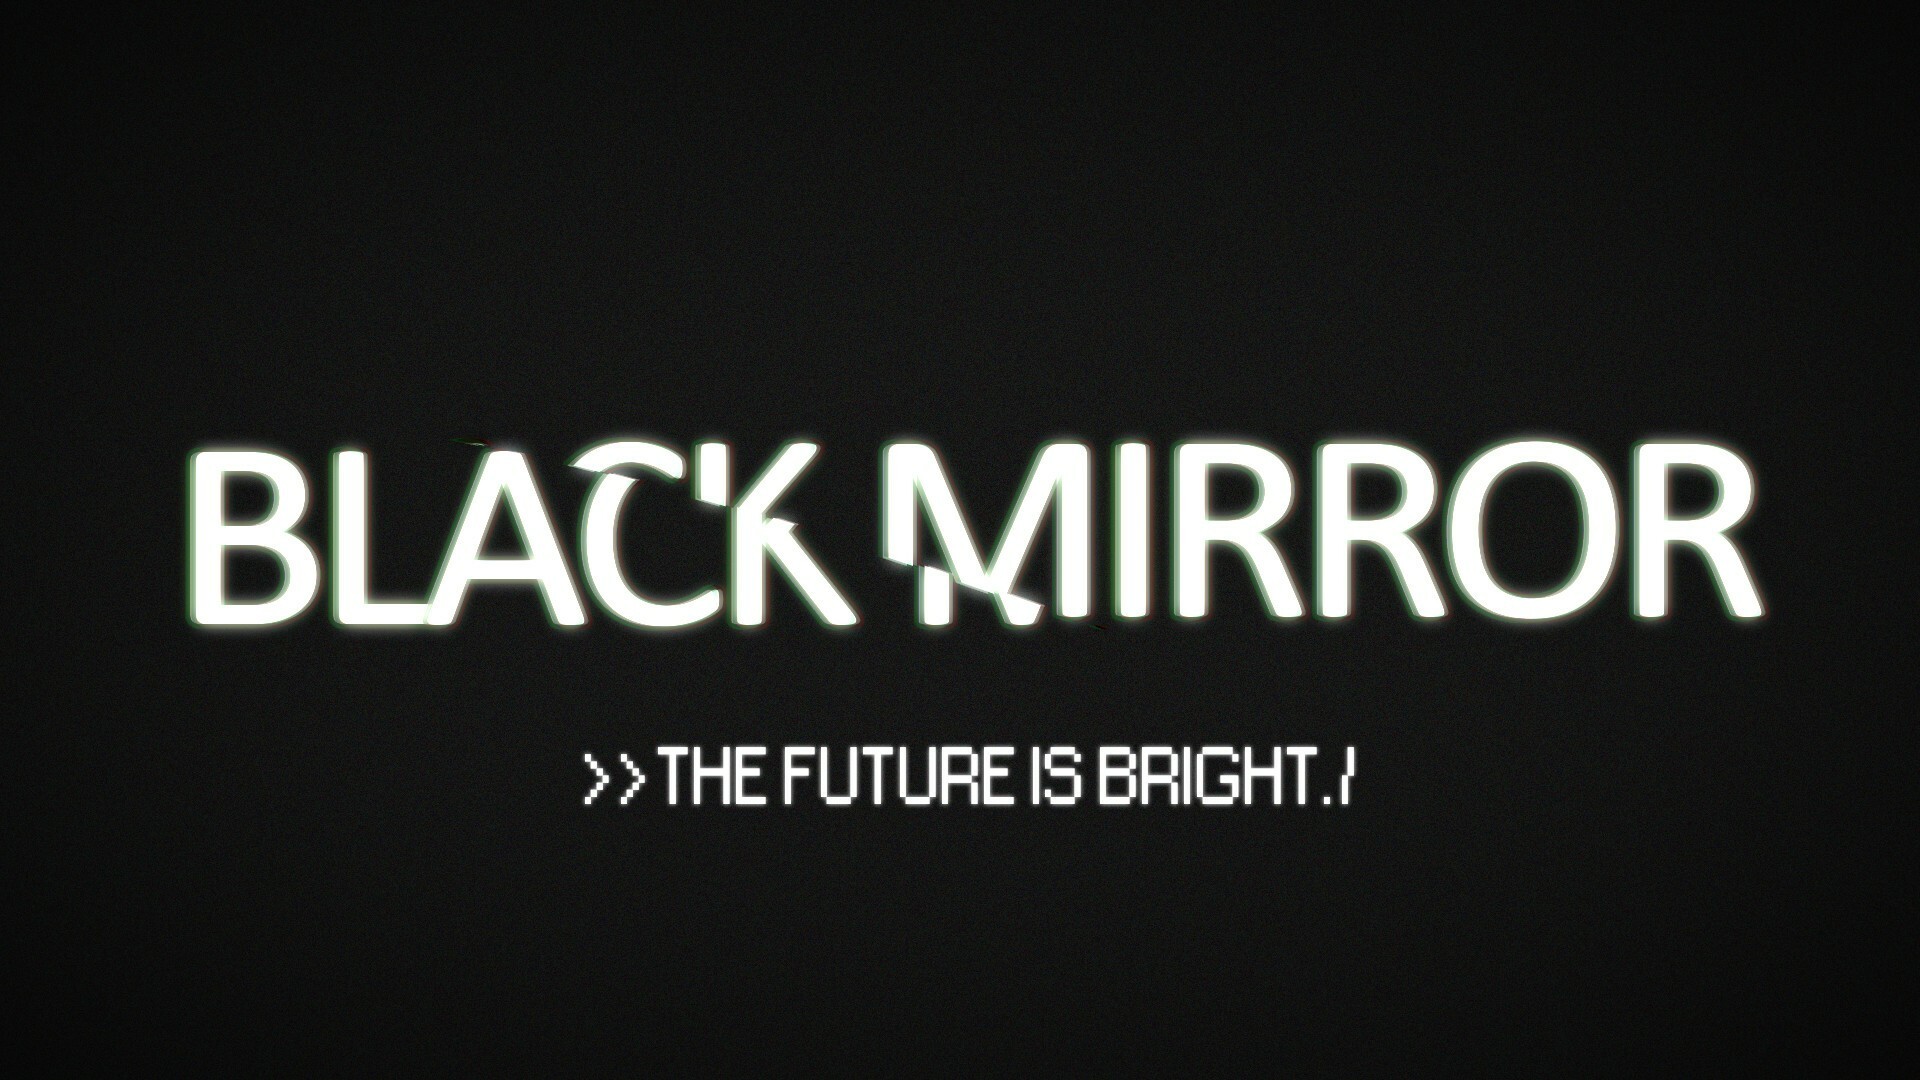 Black Mirror: The future is bright, Episodes are set in dystopian near-futures. 1920x1080 Full HD Background.